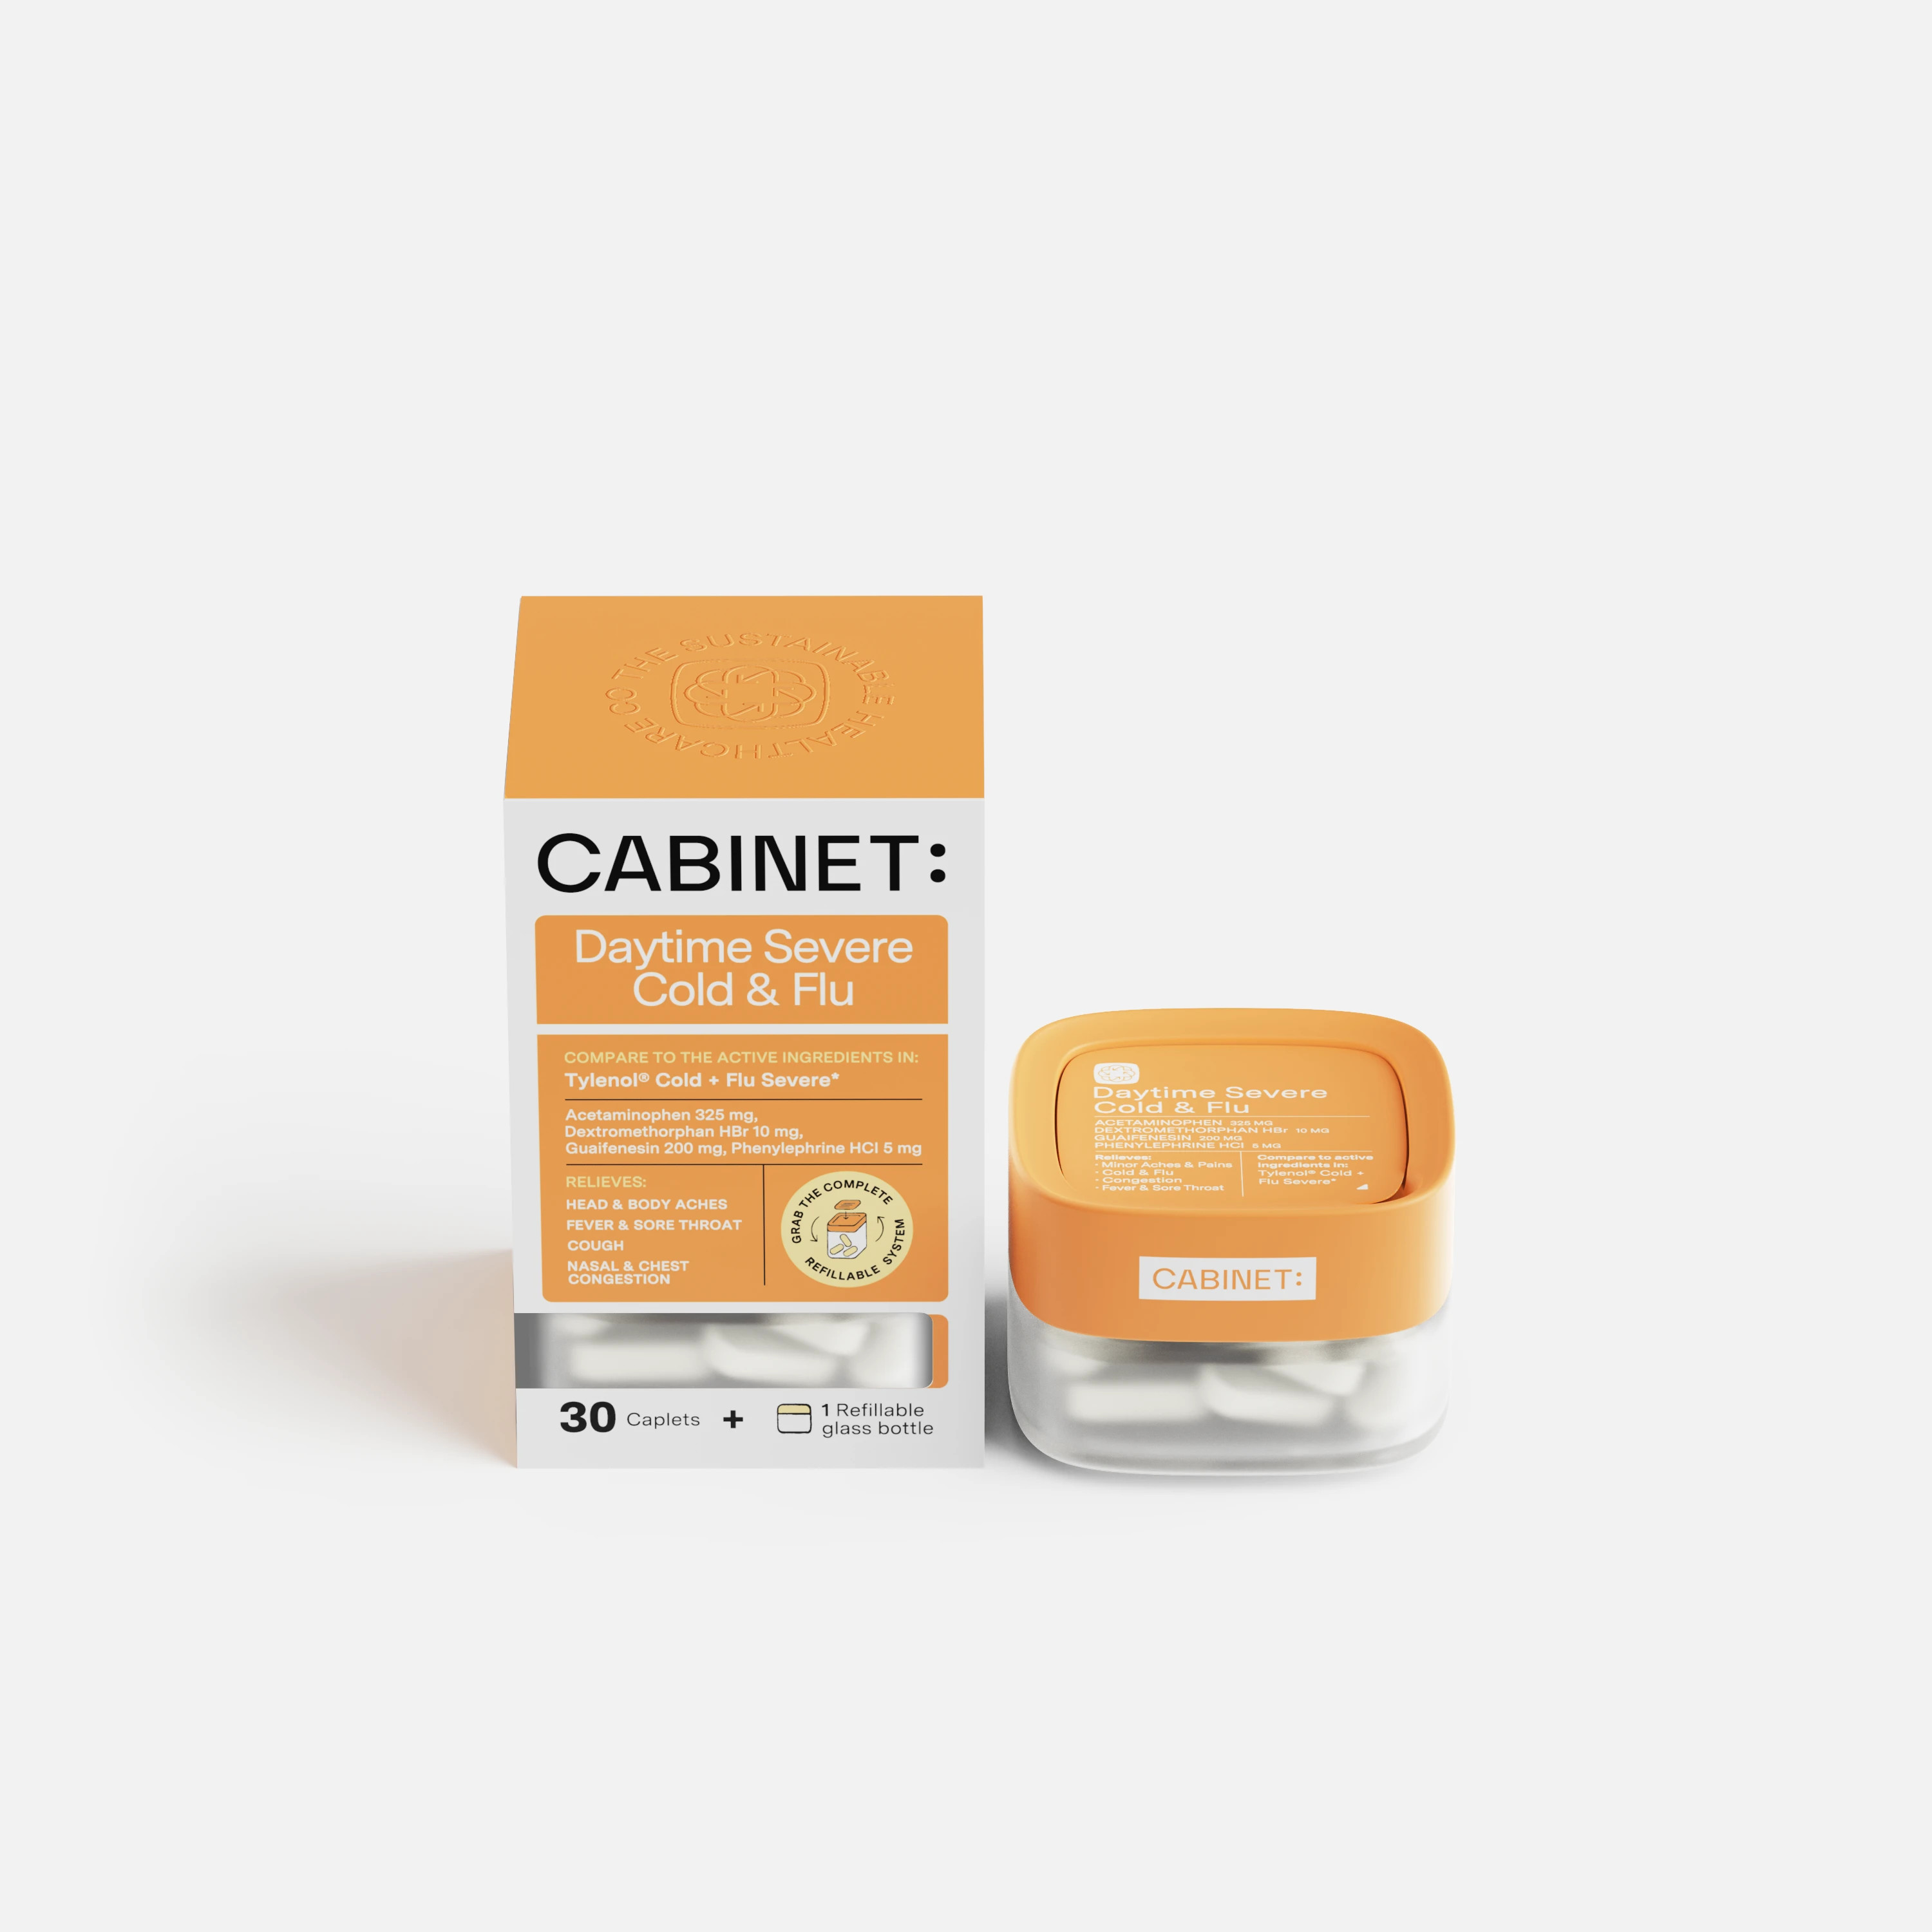 CAB-10033-Daytime-Cold- -Flu-Severe-bottle-and-pouch-centered-cc-with-pills-desktop-2316px-q=90